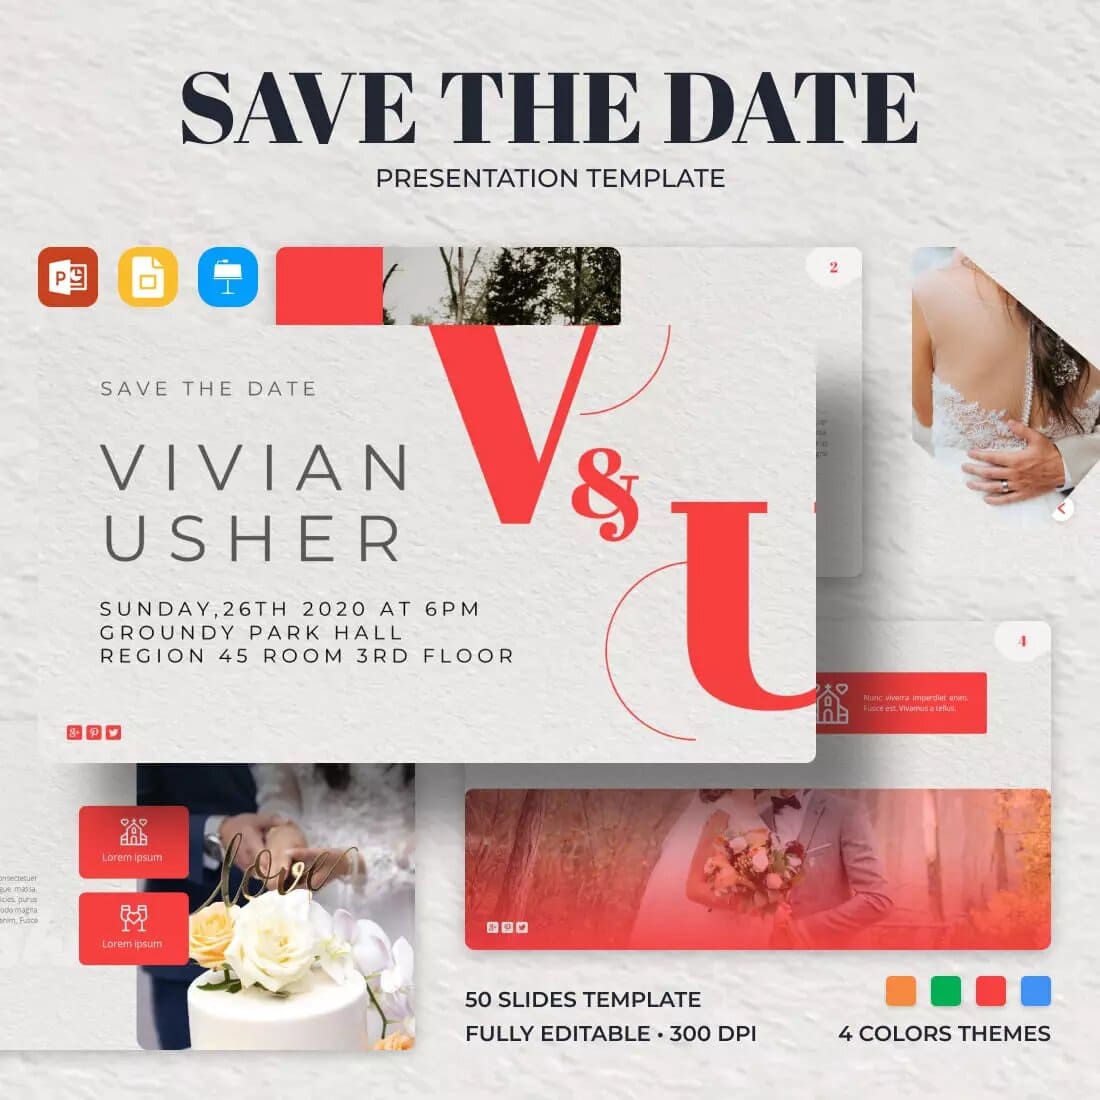 Save The Date Presentation Template Preview 2.